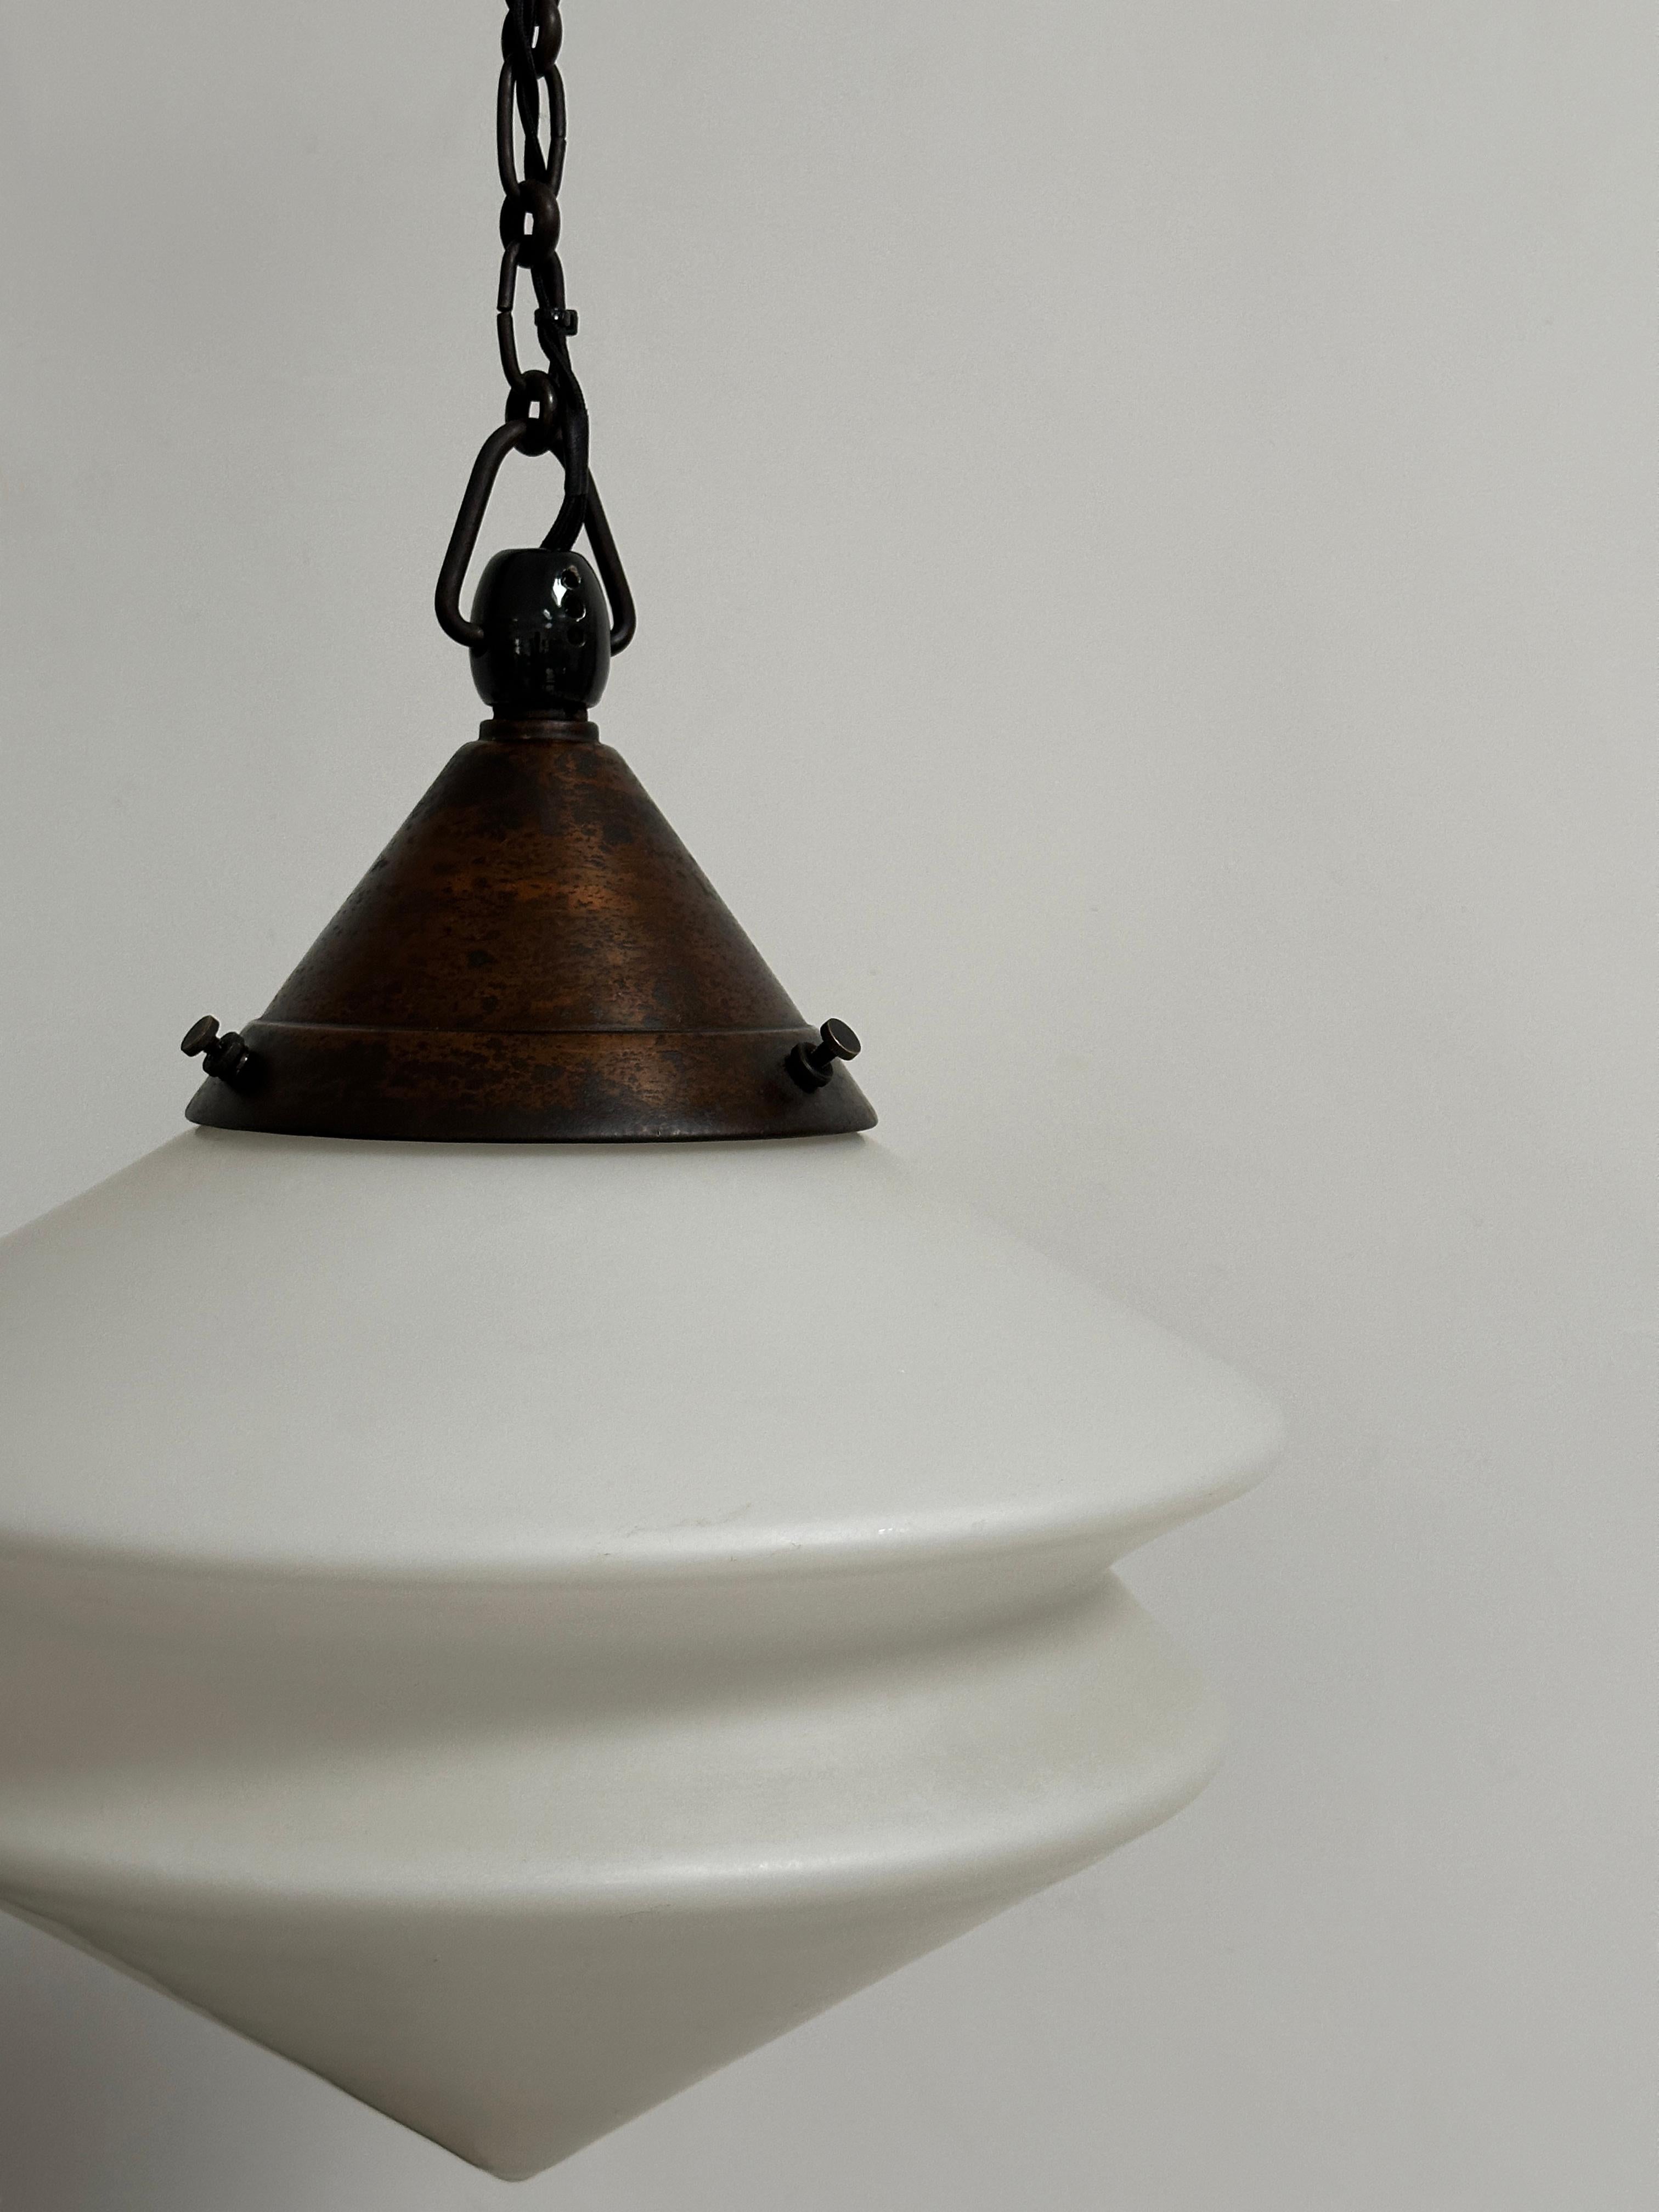 Antique Bauhaus Kandem Opaline Ceiling Pendant Light Lamp By Körting & Mathiesen In Good Condition For Sale In Sale, GB